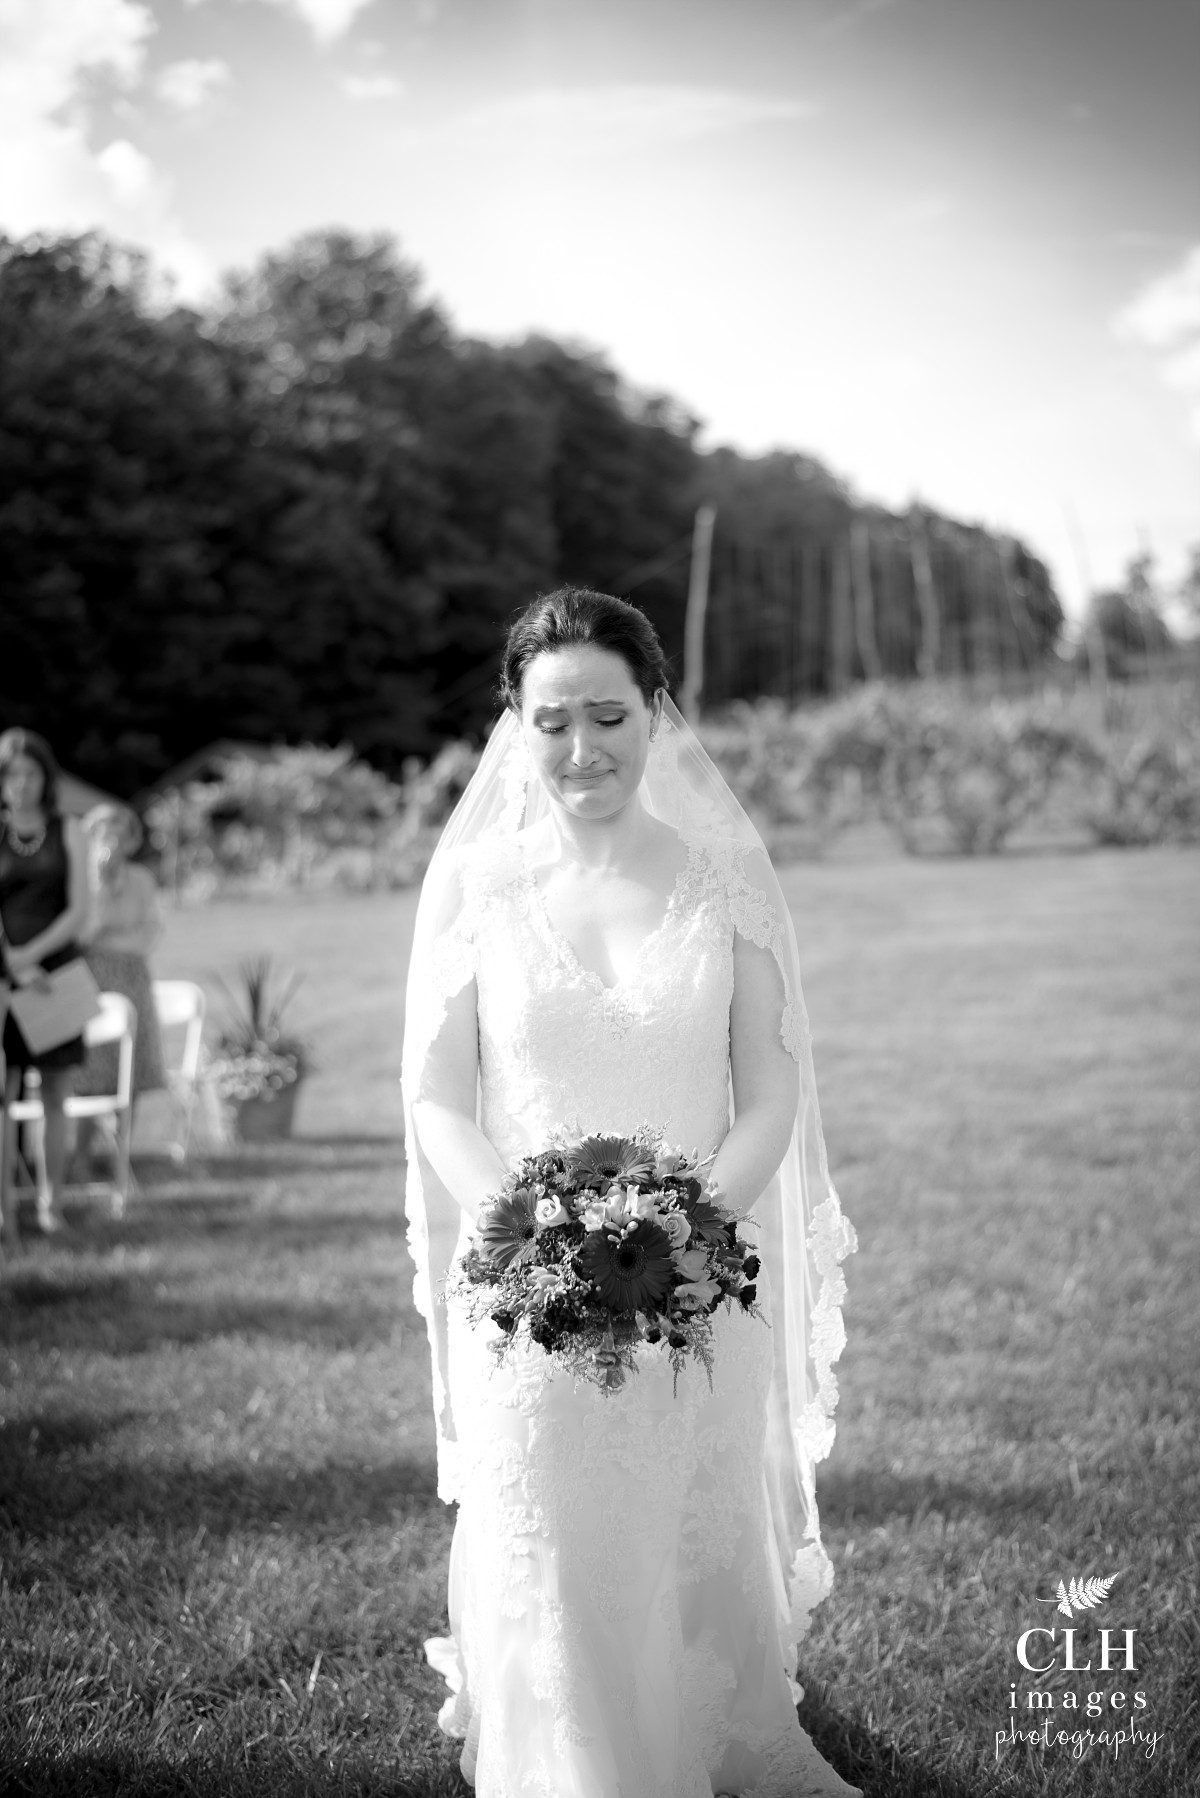 CLH images Photography Catskill New York Weddings Barn Weddings Rustic Weddings New York Wedding Photographer Becky and Harinder (58)